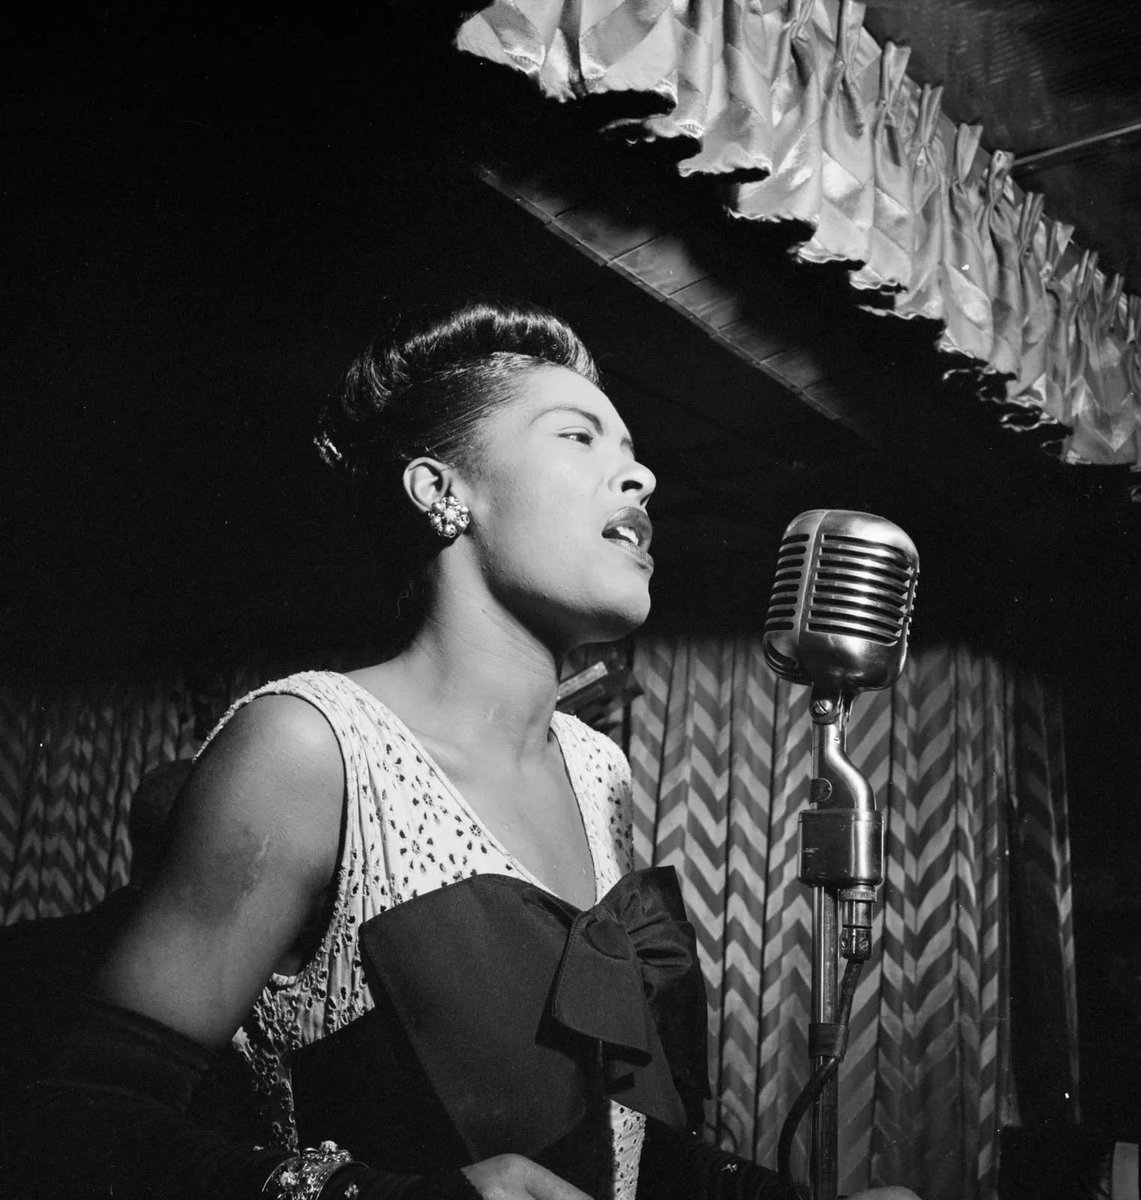 #OnThisDay in 1915, Billie Holiday was born in Baltimore and went on to become one of the greatest jazz singers of all time. One critic concluded that her unique voice “changed the art of American pop vocals forever.” Born Eleanora Fagan, she endured a horrific childhood. At